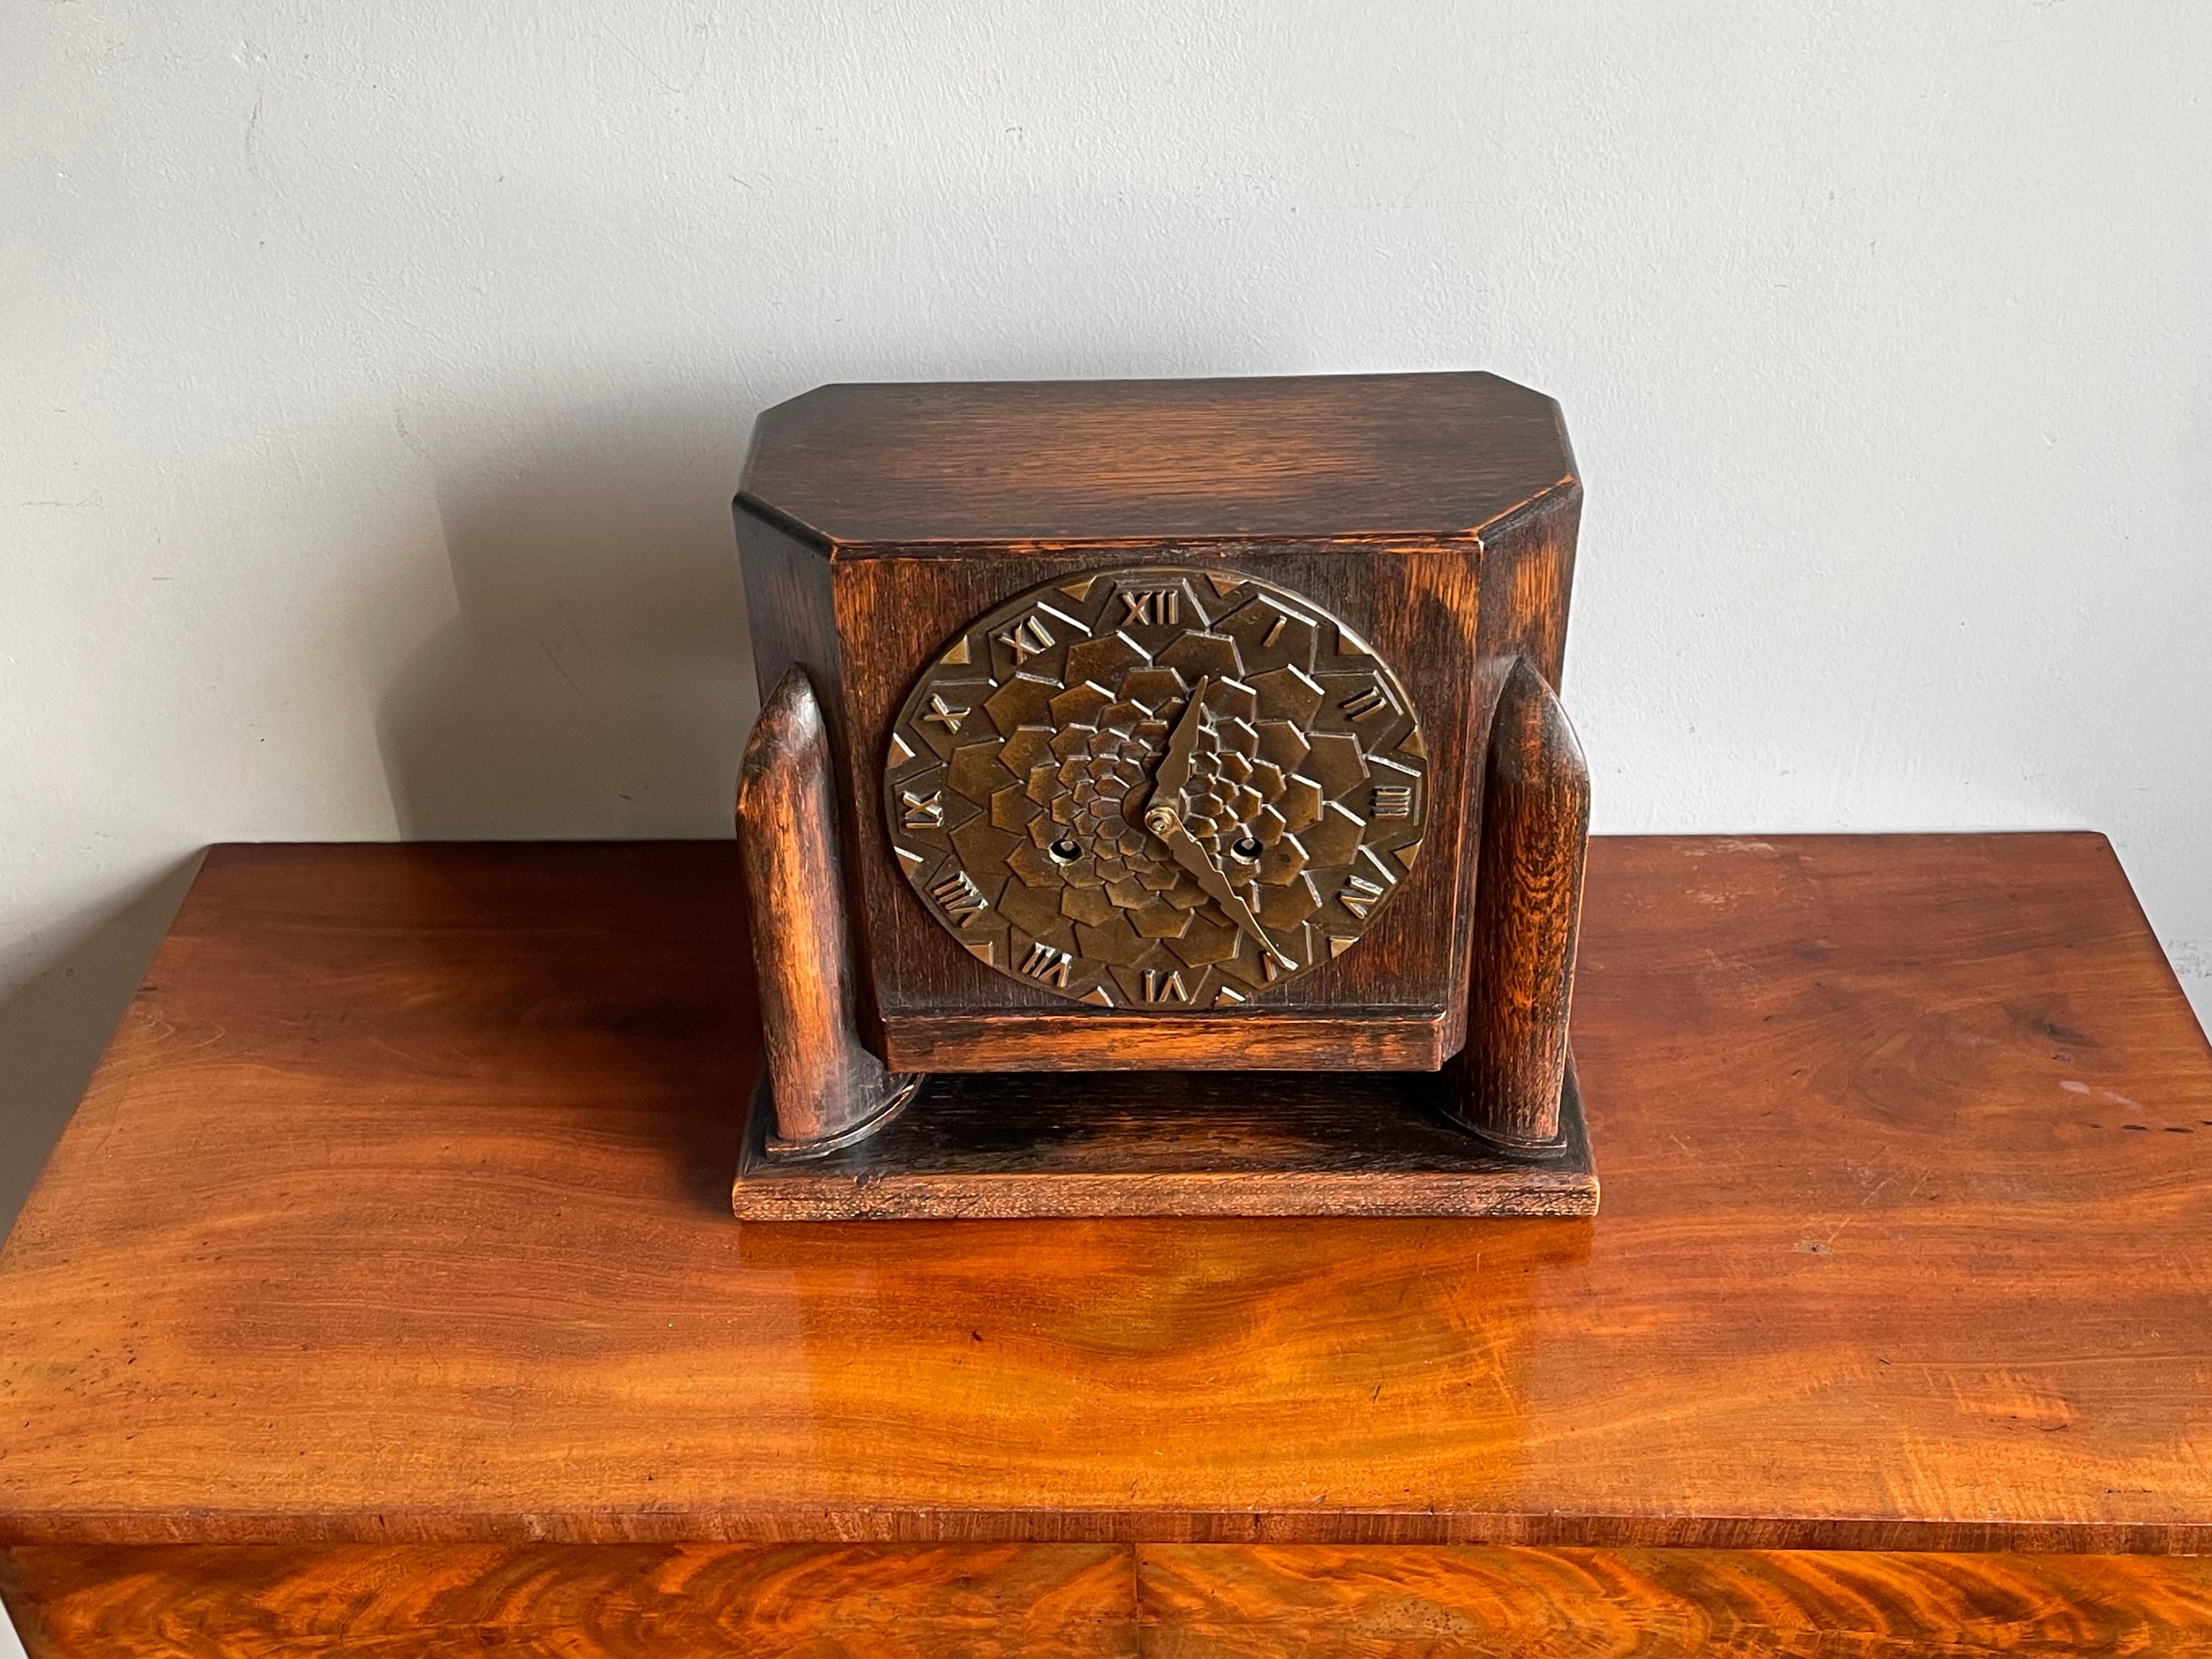 Arts and Crafts Dutch Arts & Crafts Oak Mantle / Desk Clock with Stunning Bronze Dial Face 1915 For Sale